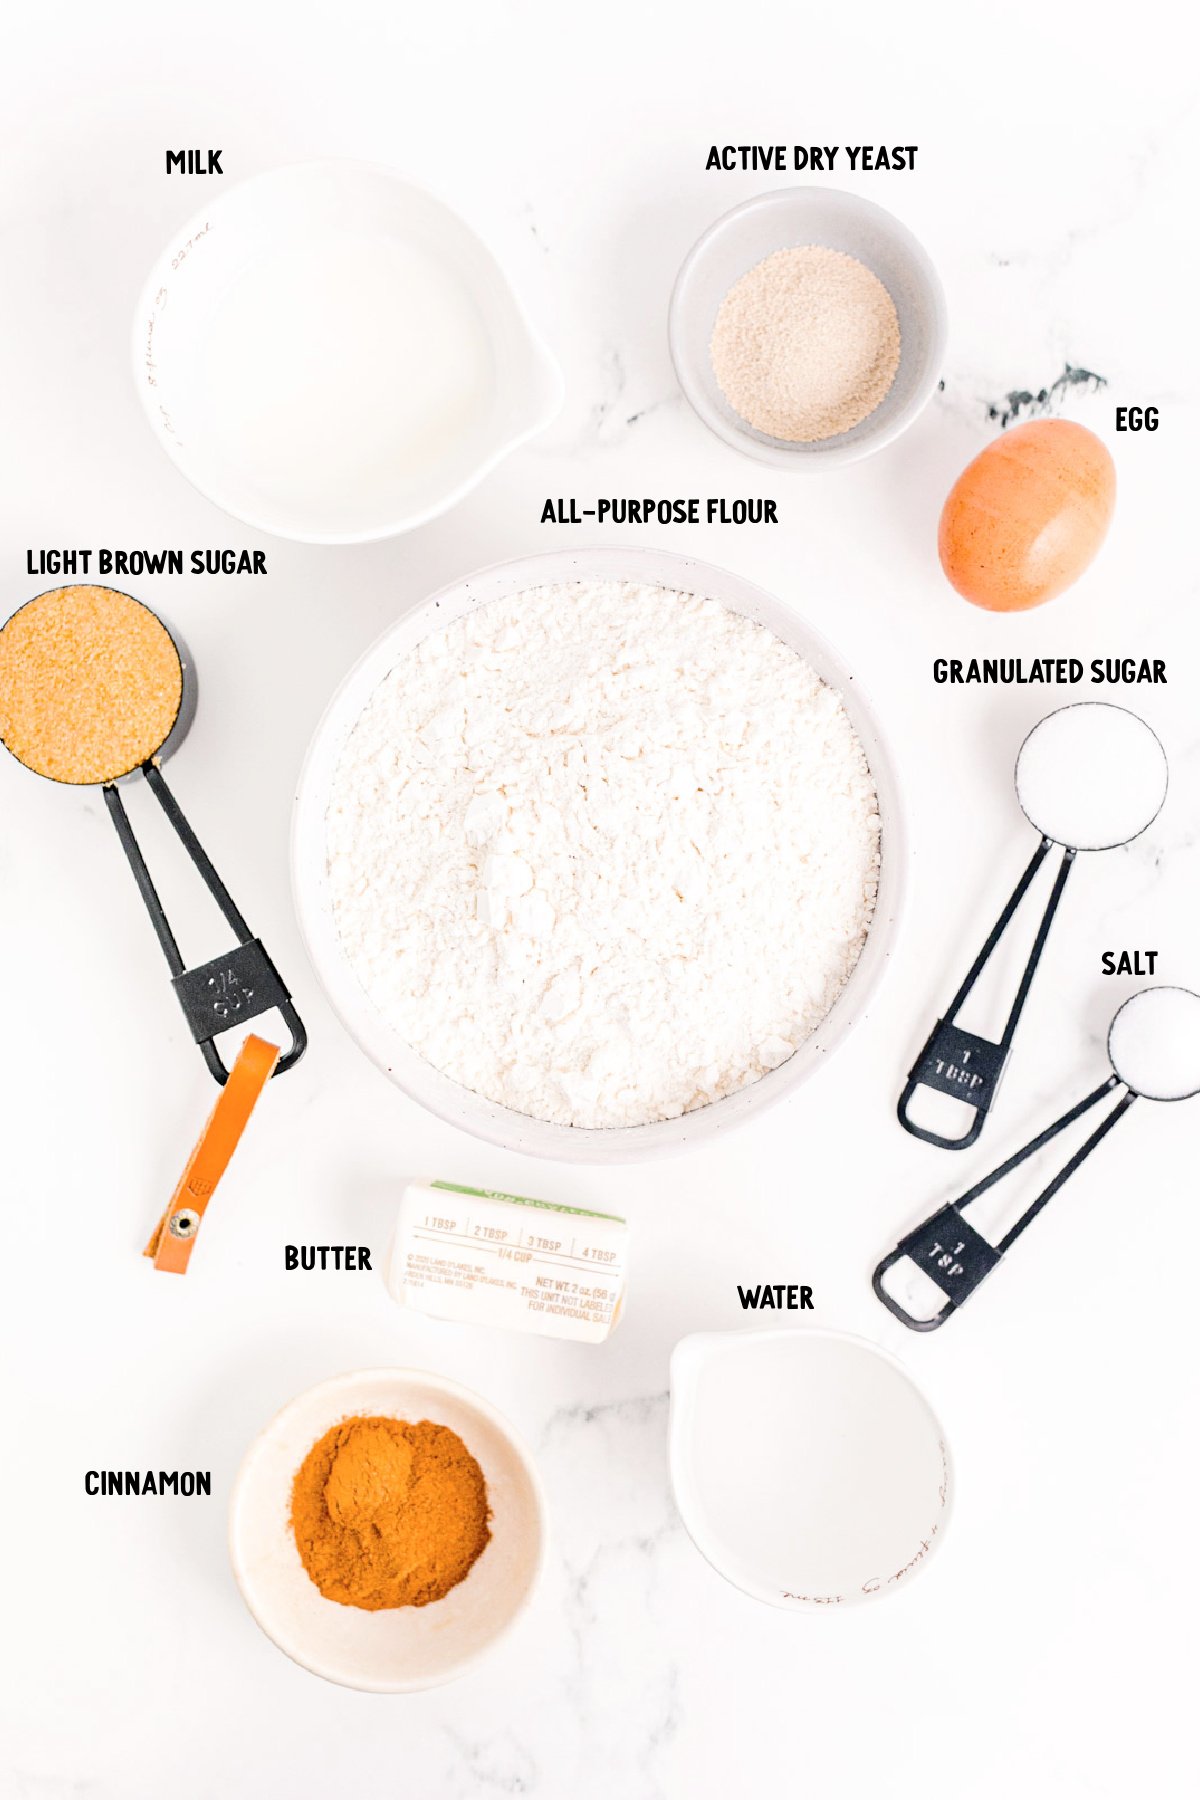 Overhead photo of ingredients to make cinnamon swirl bread prepped on a marble surface.